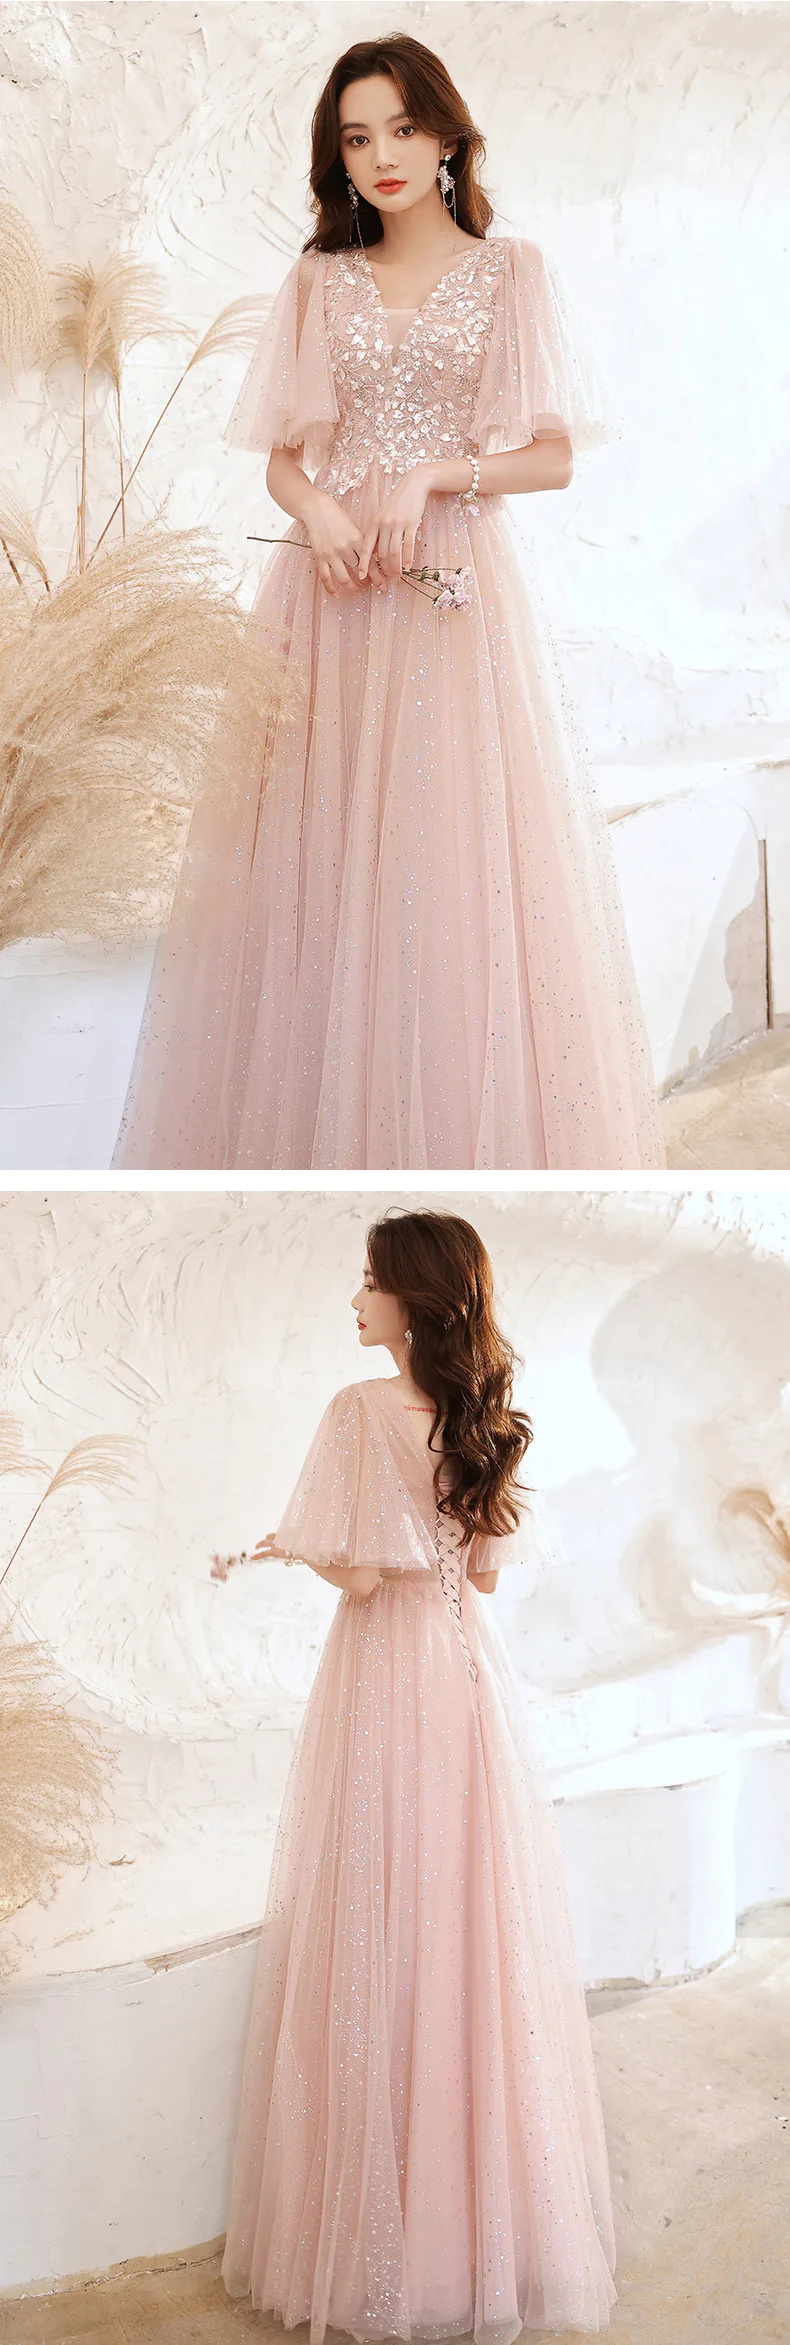 Classy-Flutter-Sleeve-Pink-Tulle-Formal-Evening-Party-Dress-Ball-Gown13